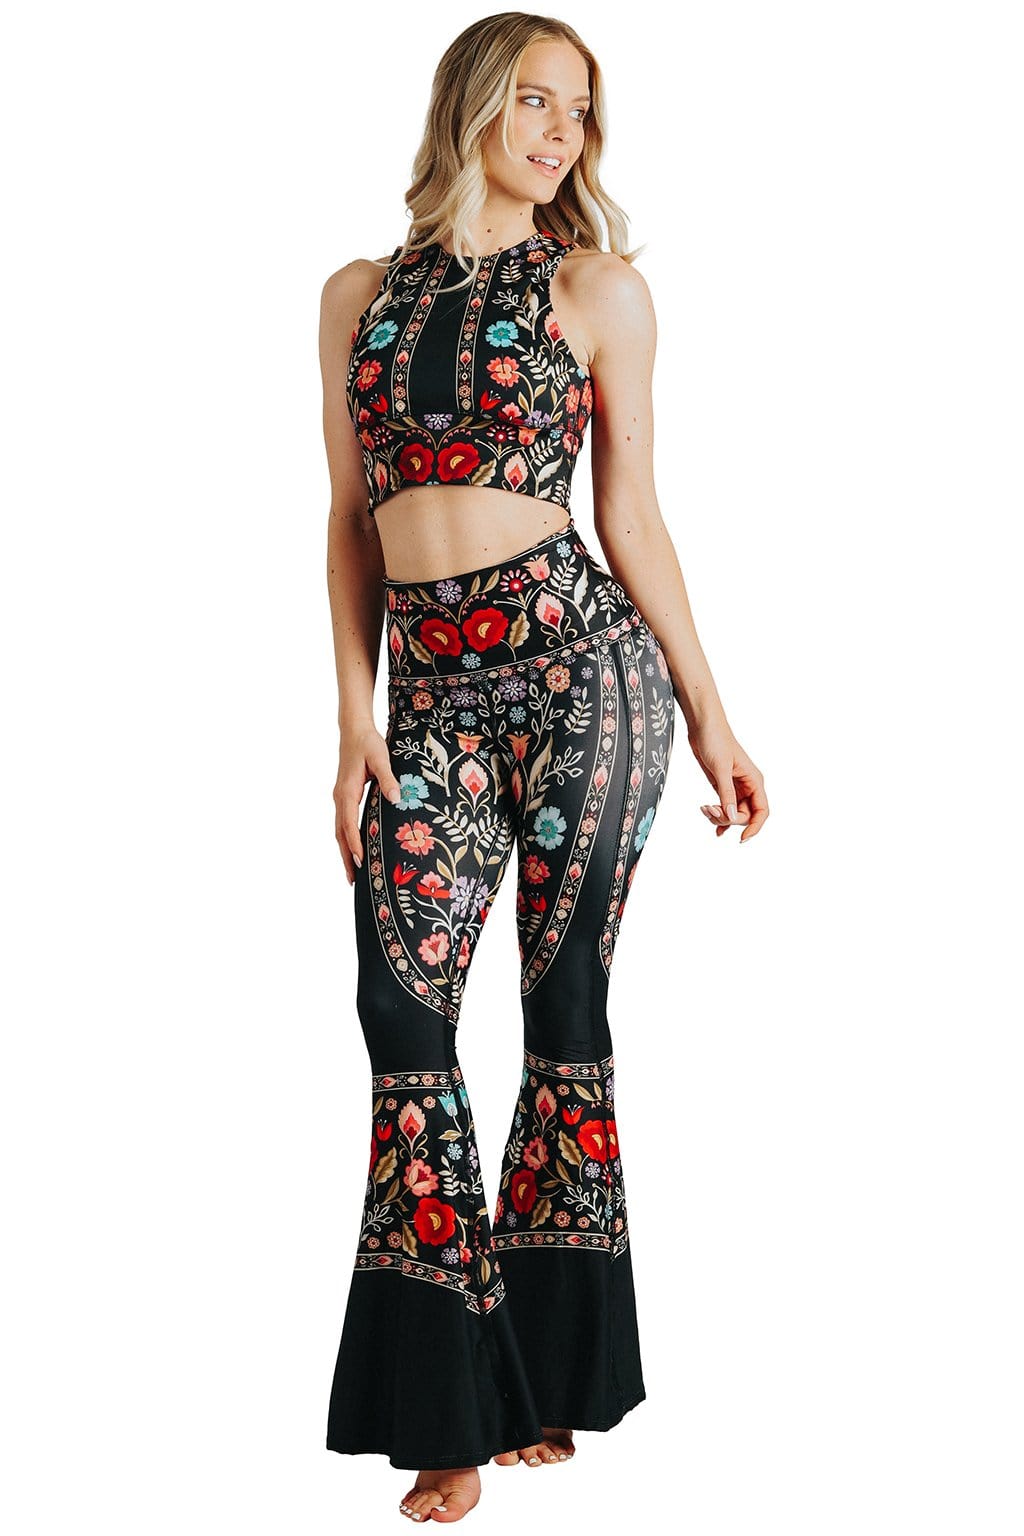 Rustica Printed Bell Bottoms by Yoga Democracy